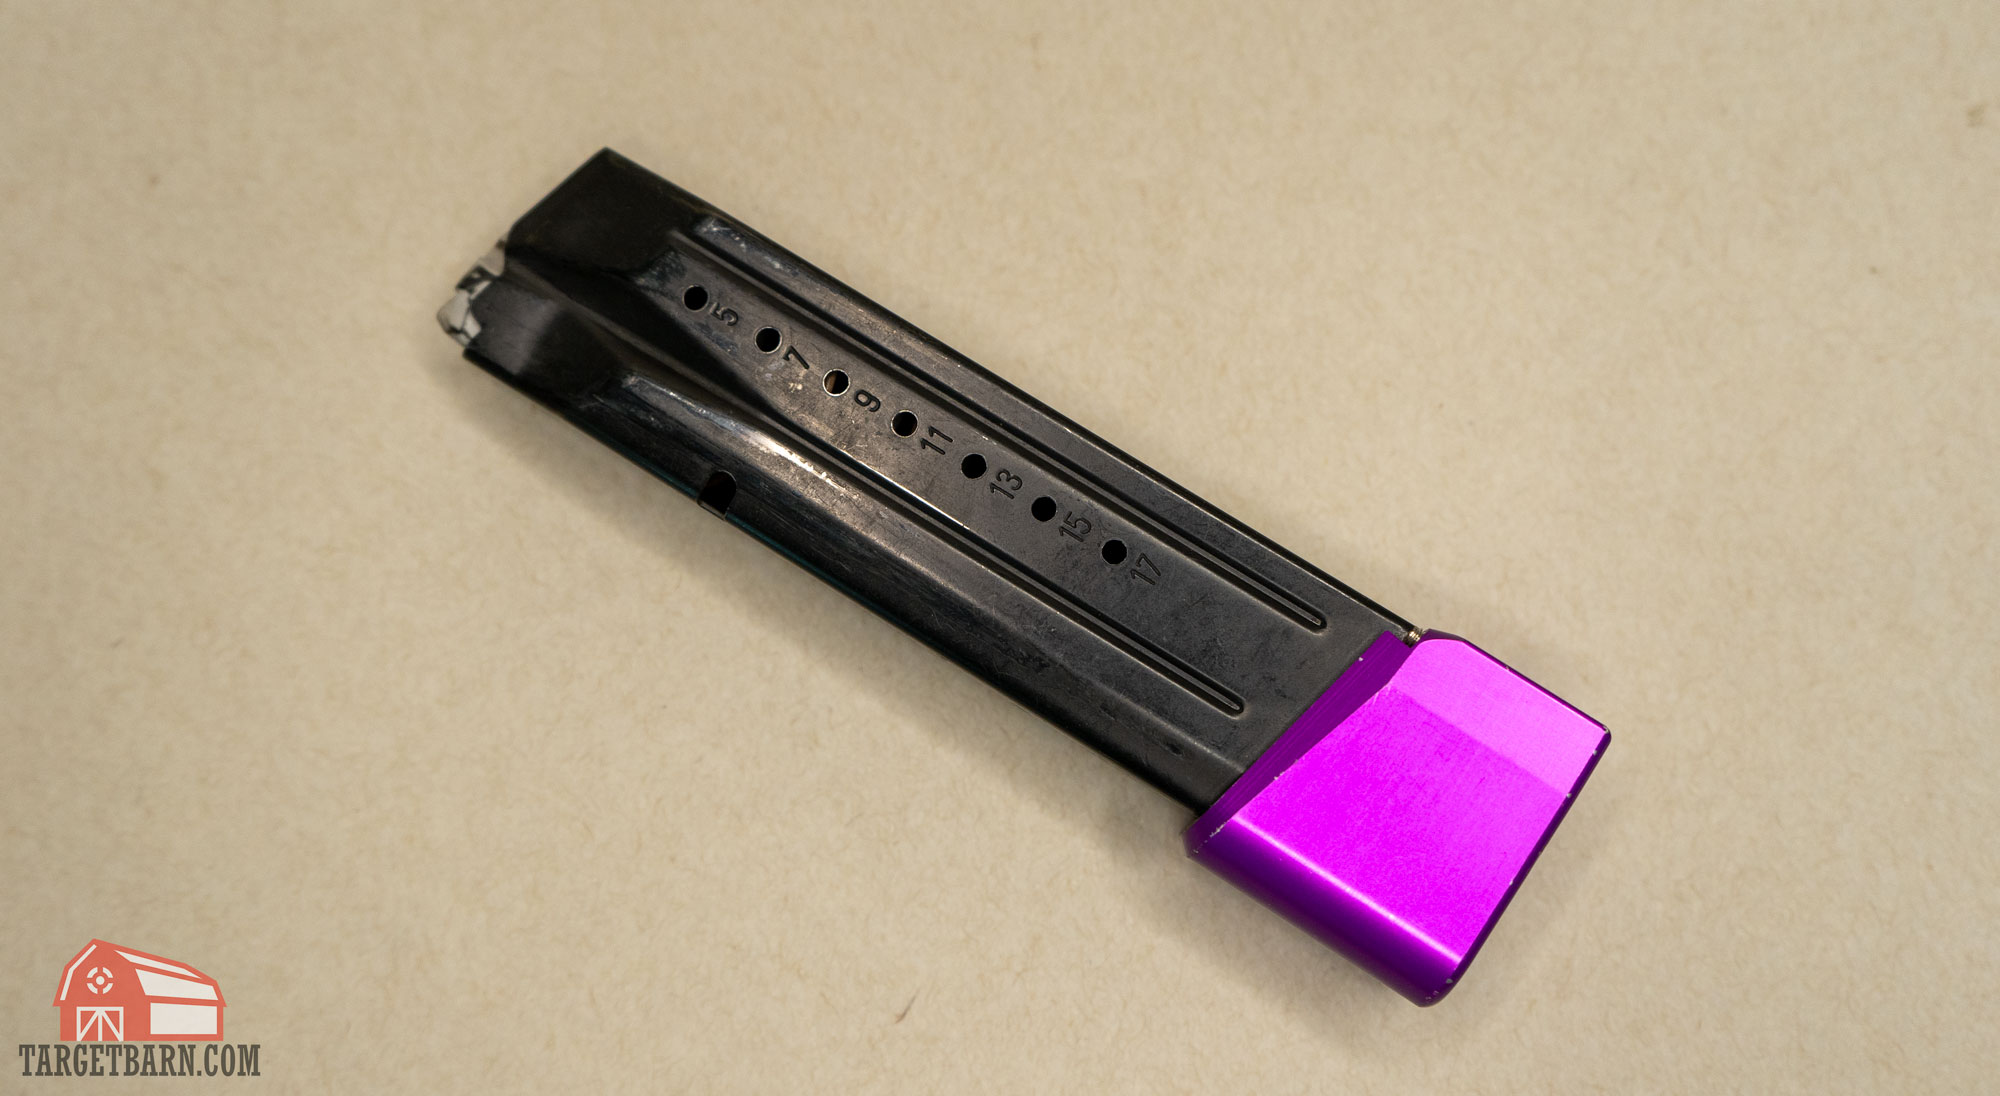 a purple magazine basepad extender from springer precision